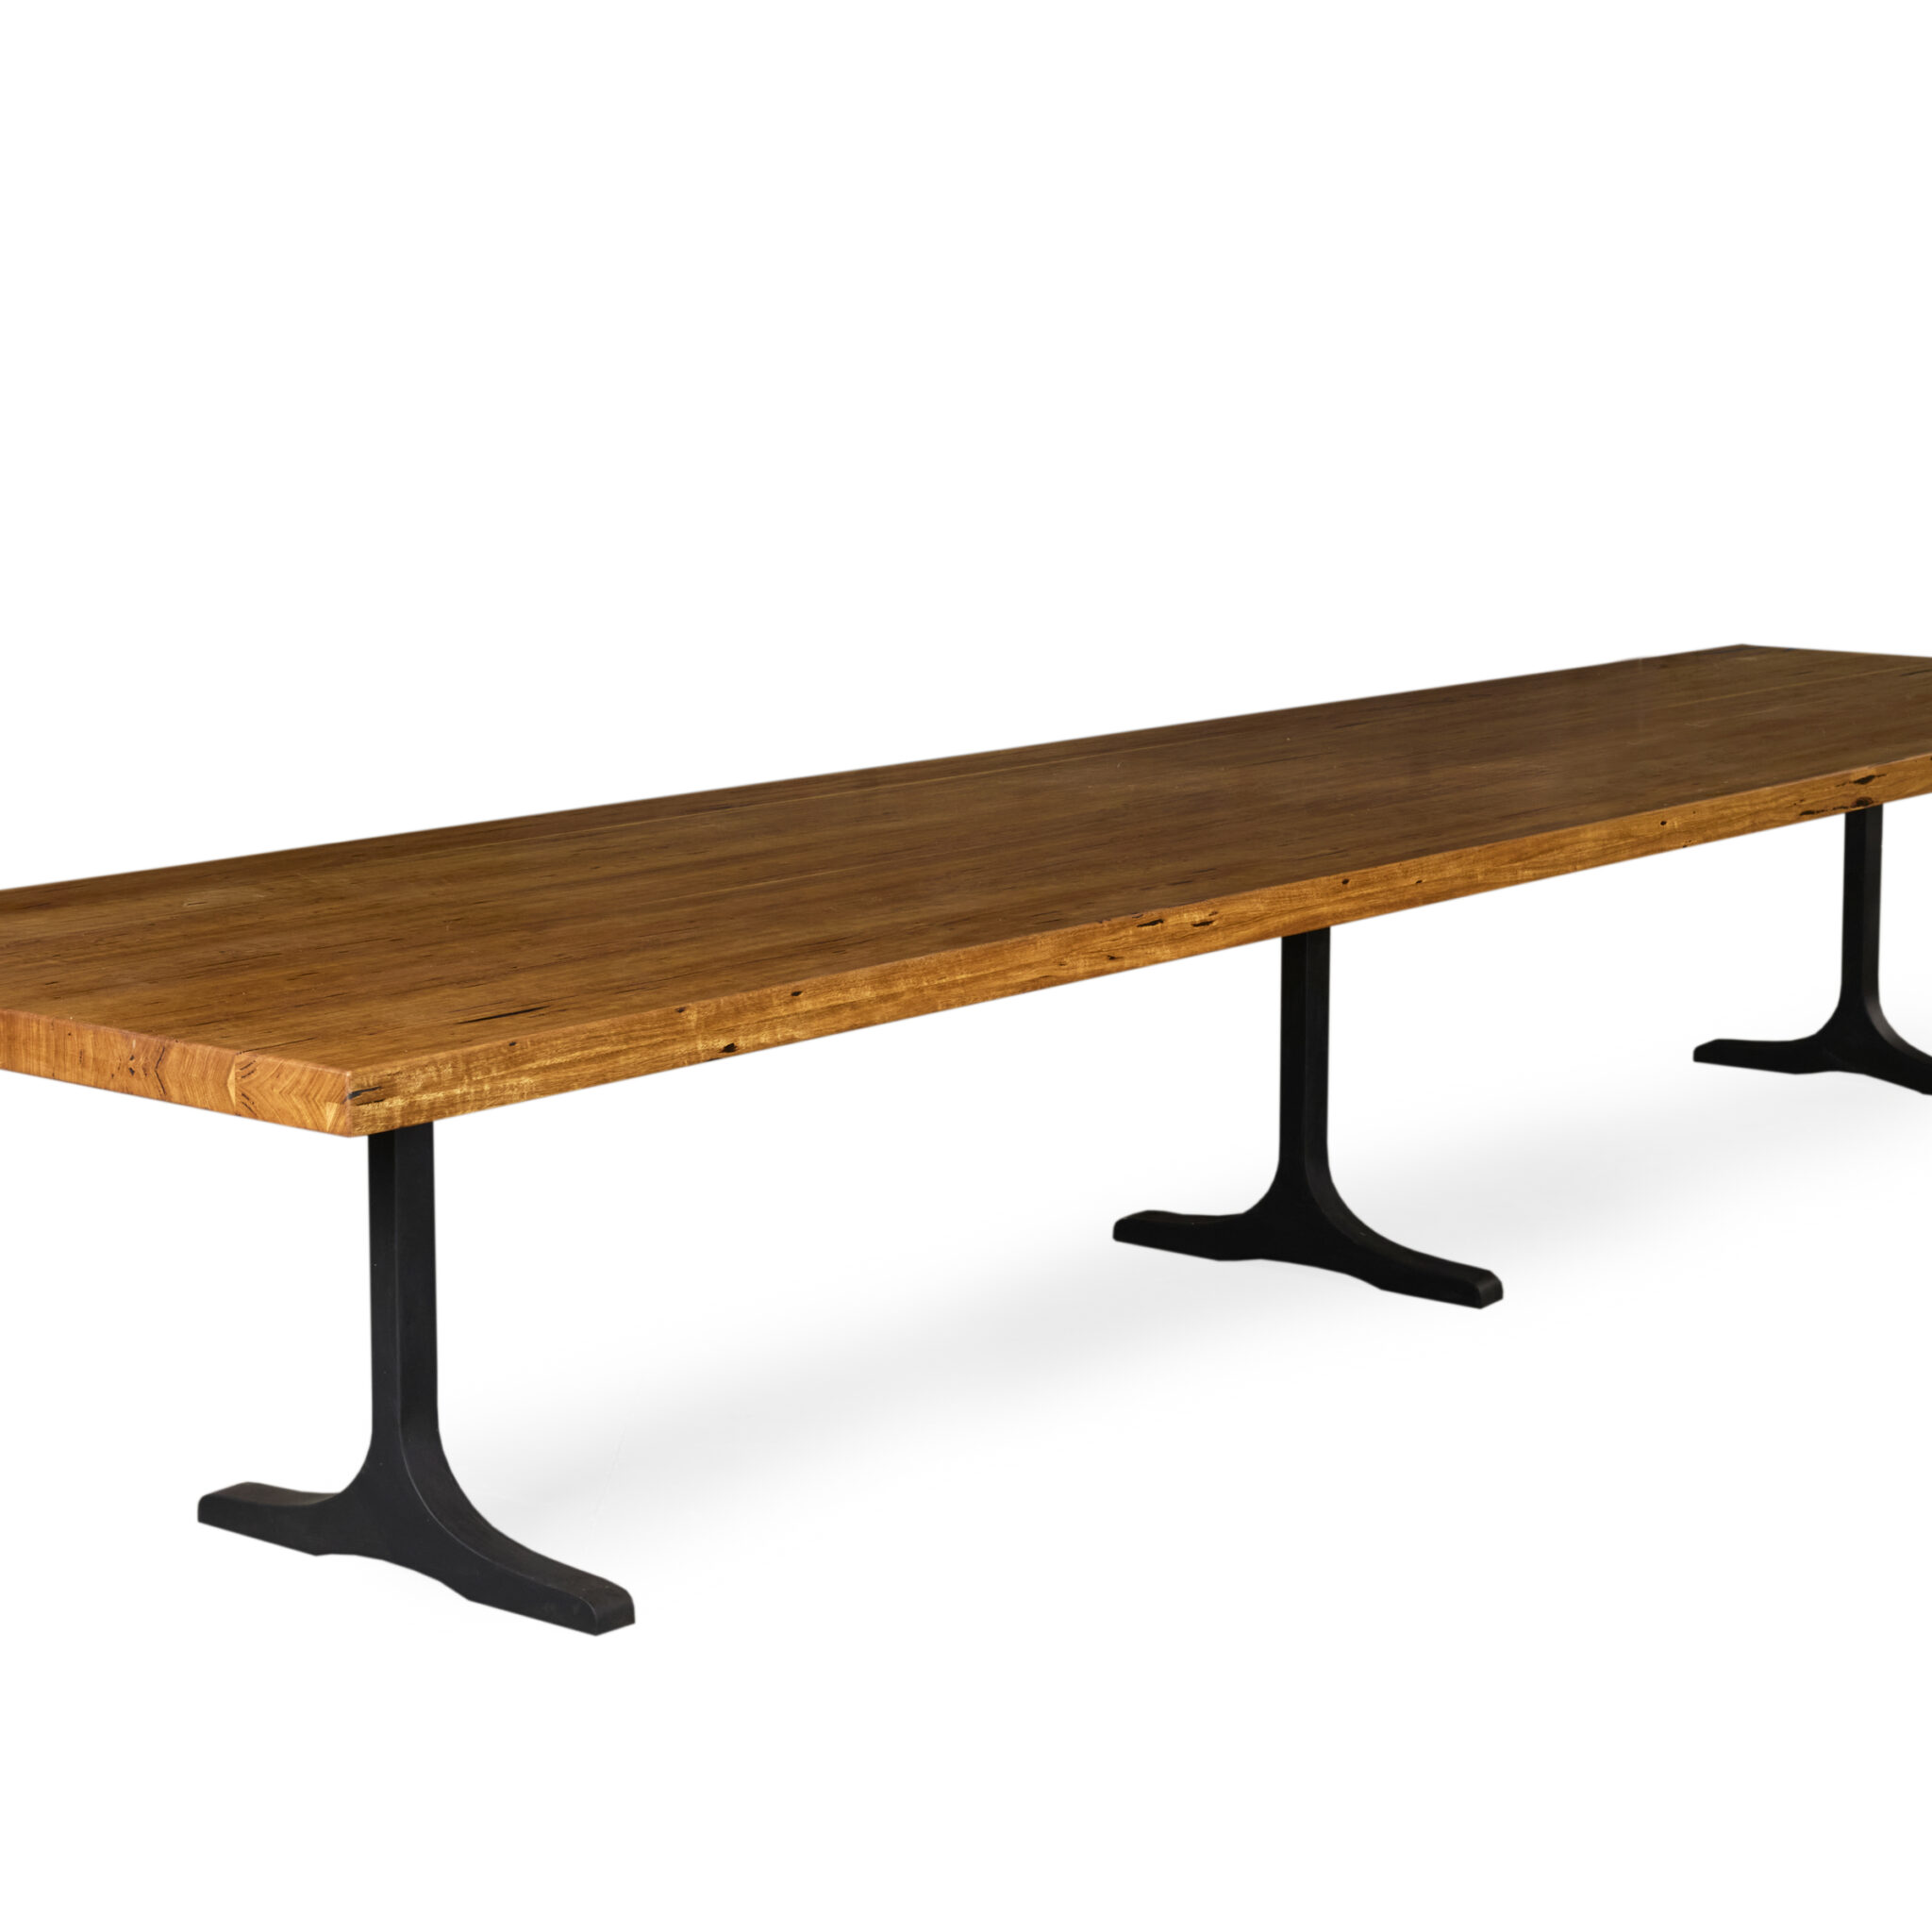 Arranmore Furniture presents Rouge Dining Table Custom Edge - Victorian Ash timber with I Beam Black Steel base. Ideal for gatherings. Handcrafted excellence.